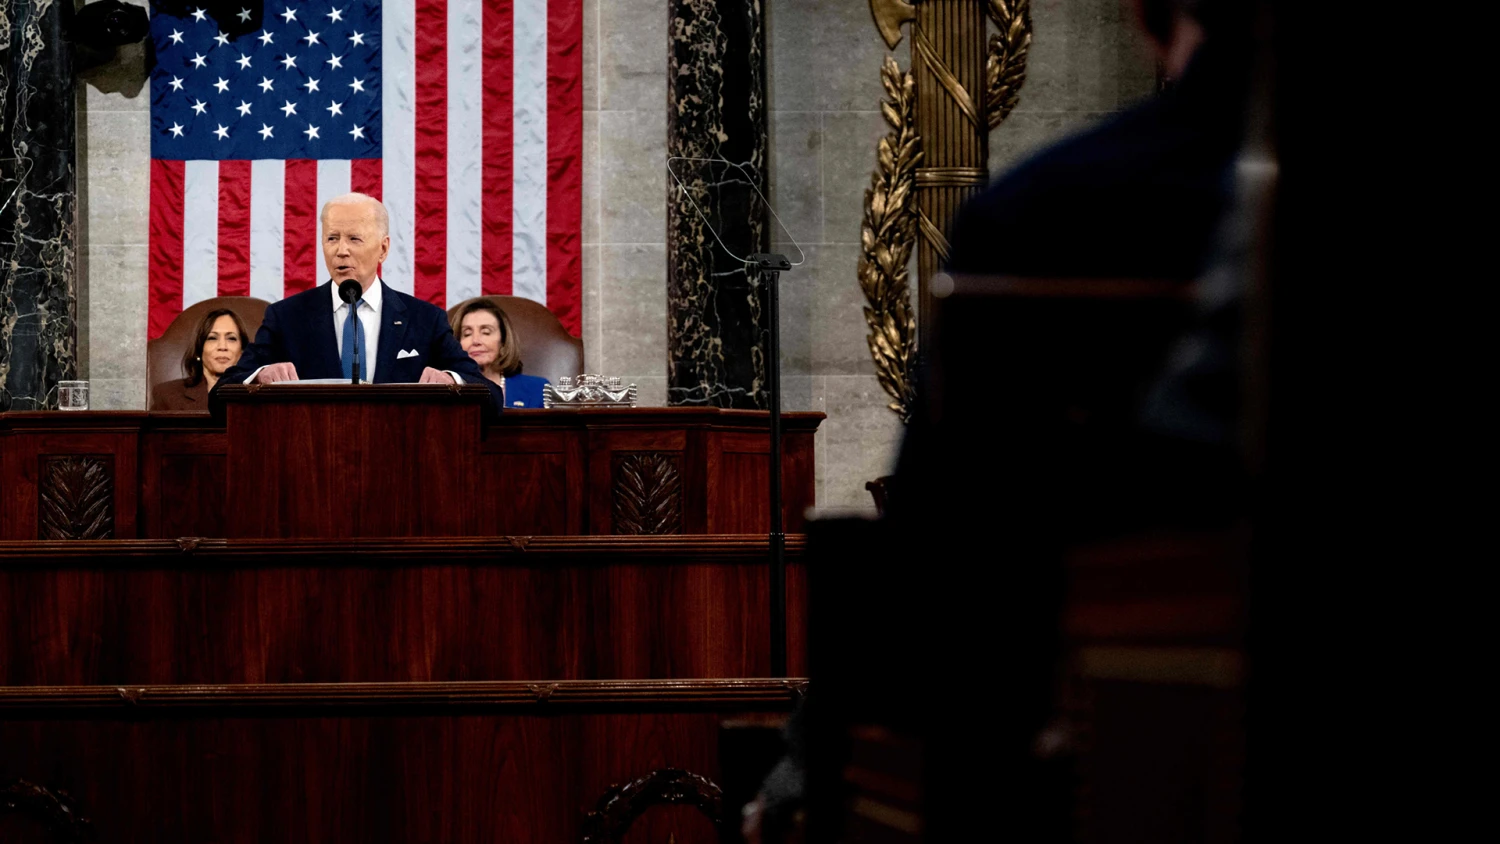 Fox News led cable networks in viewership during the address (Credits: MSNBC)